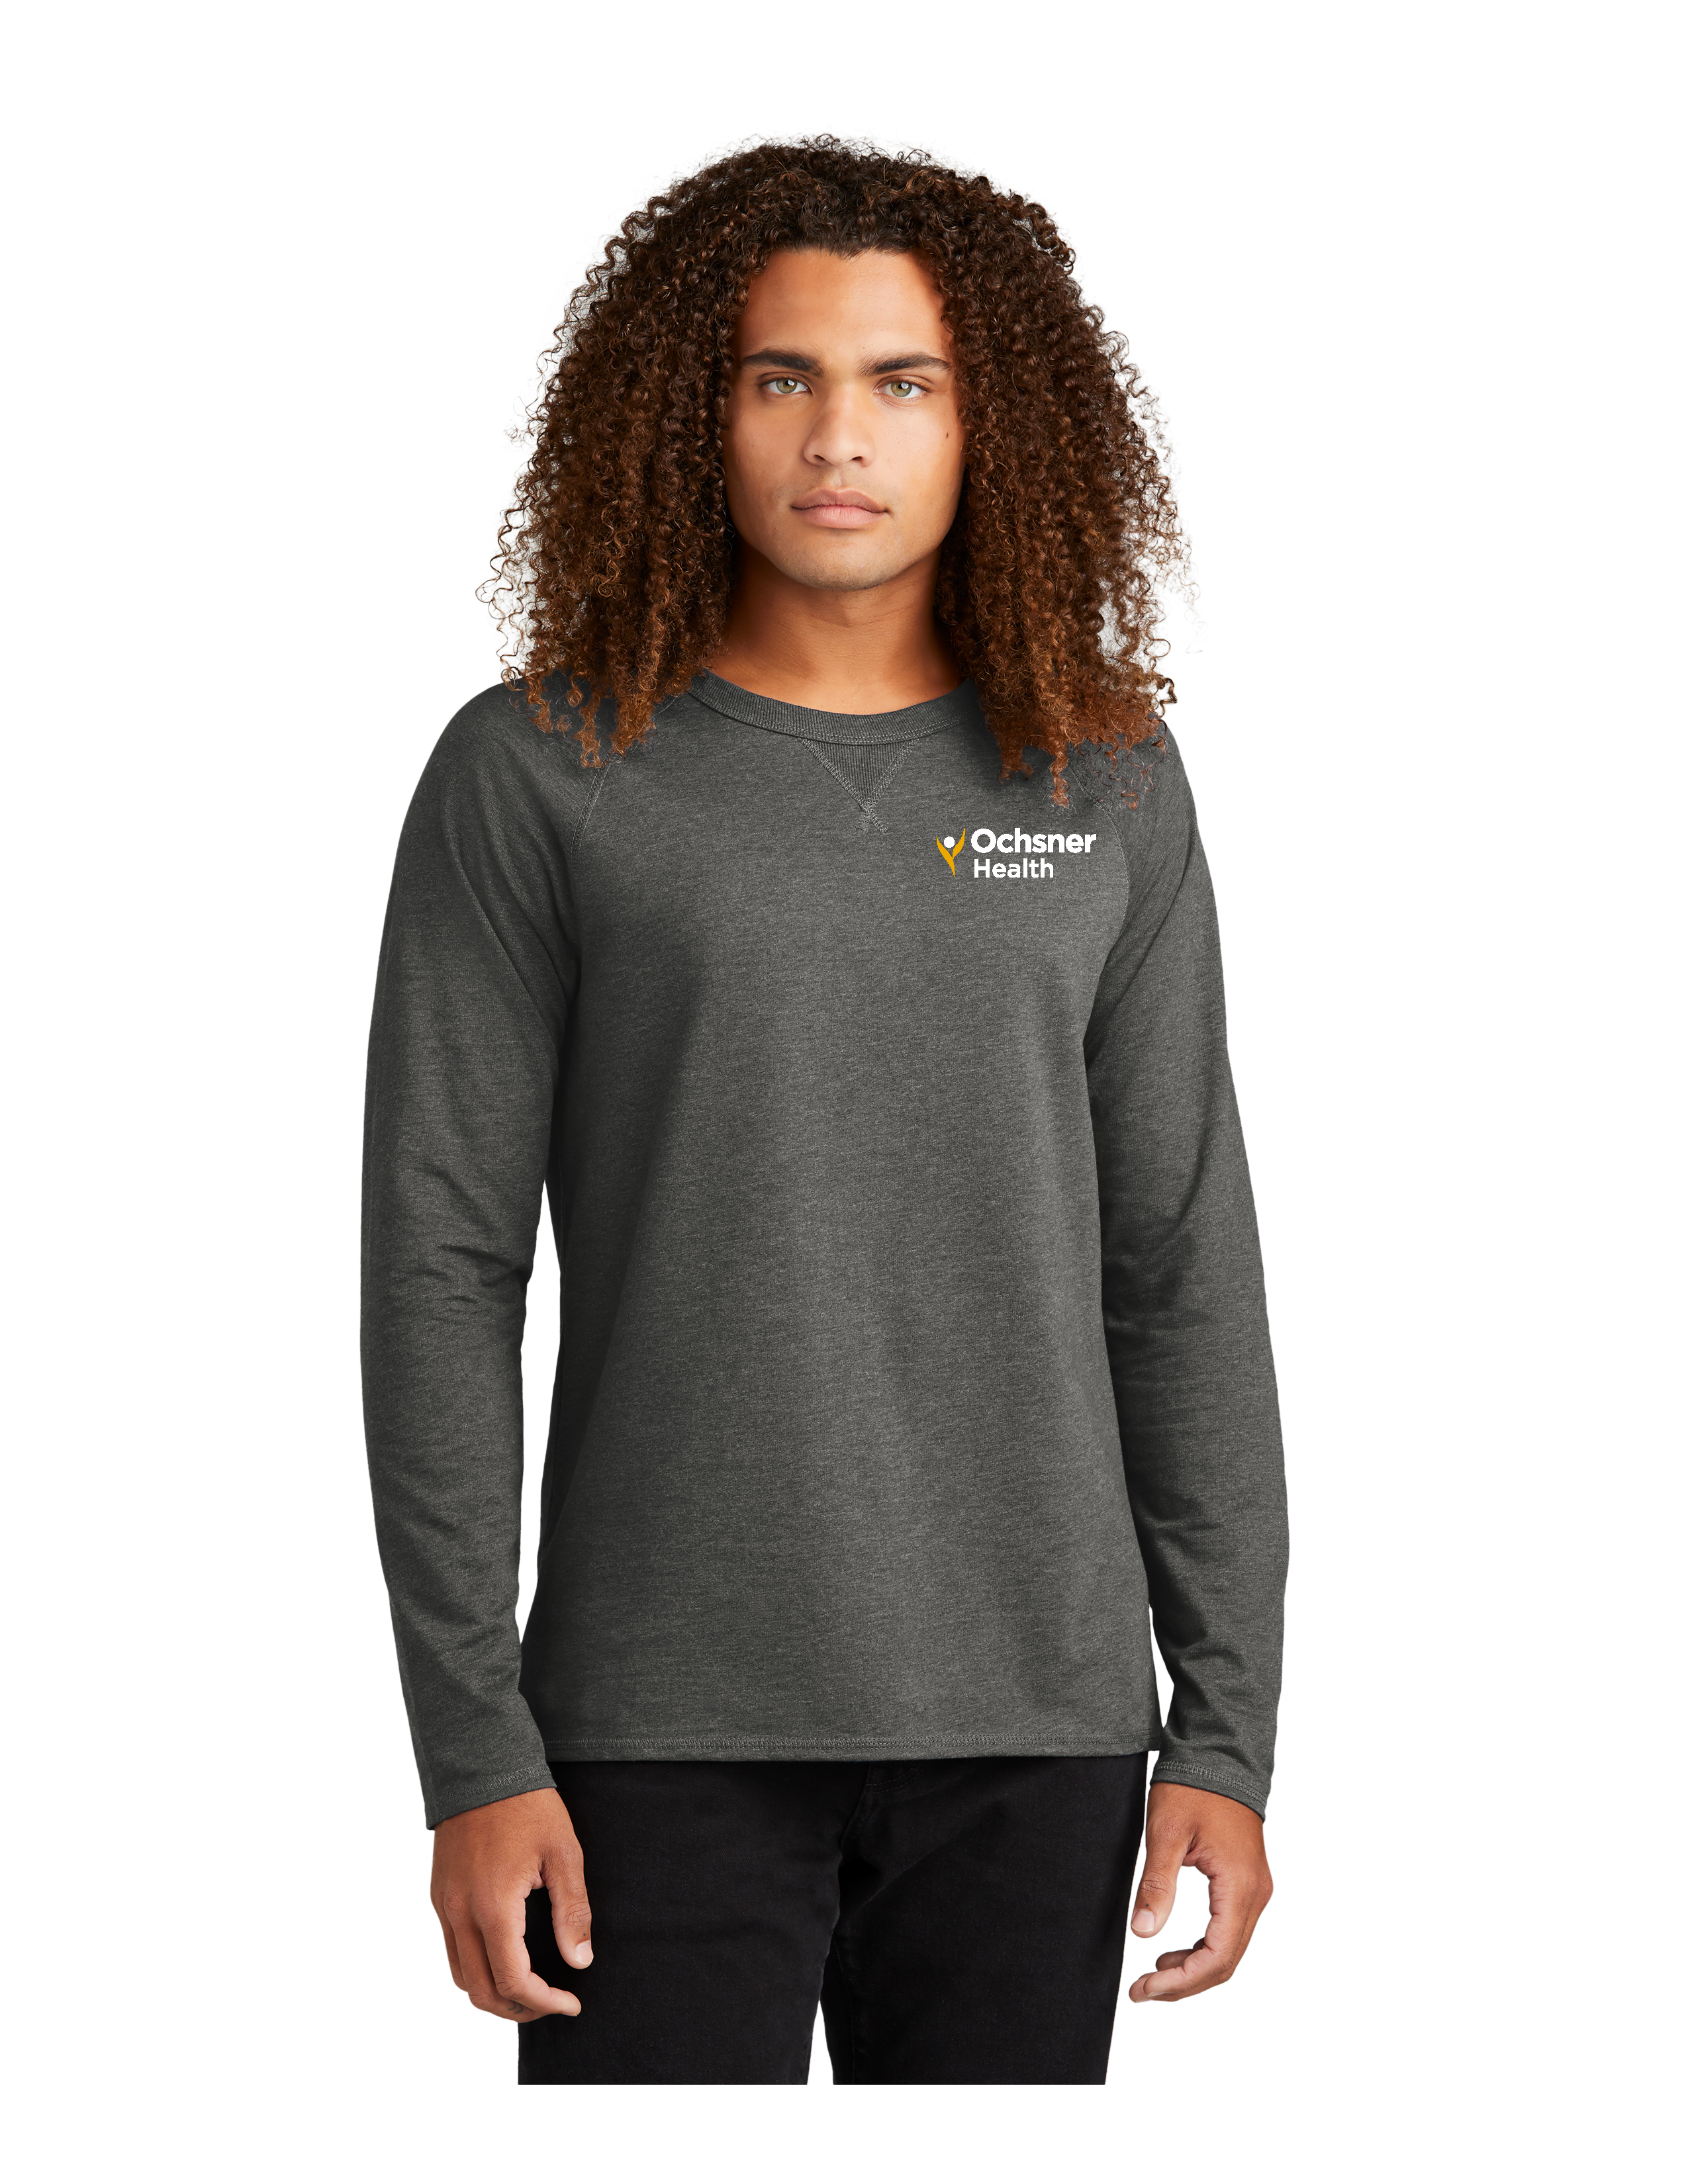 Unisex French Terry Crewneck, Charcoal, large image number 1